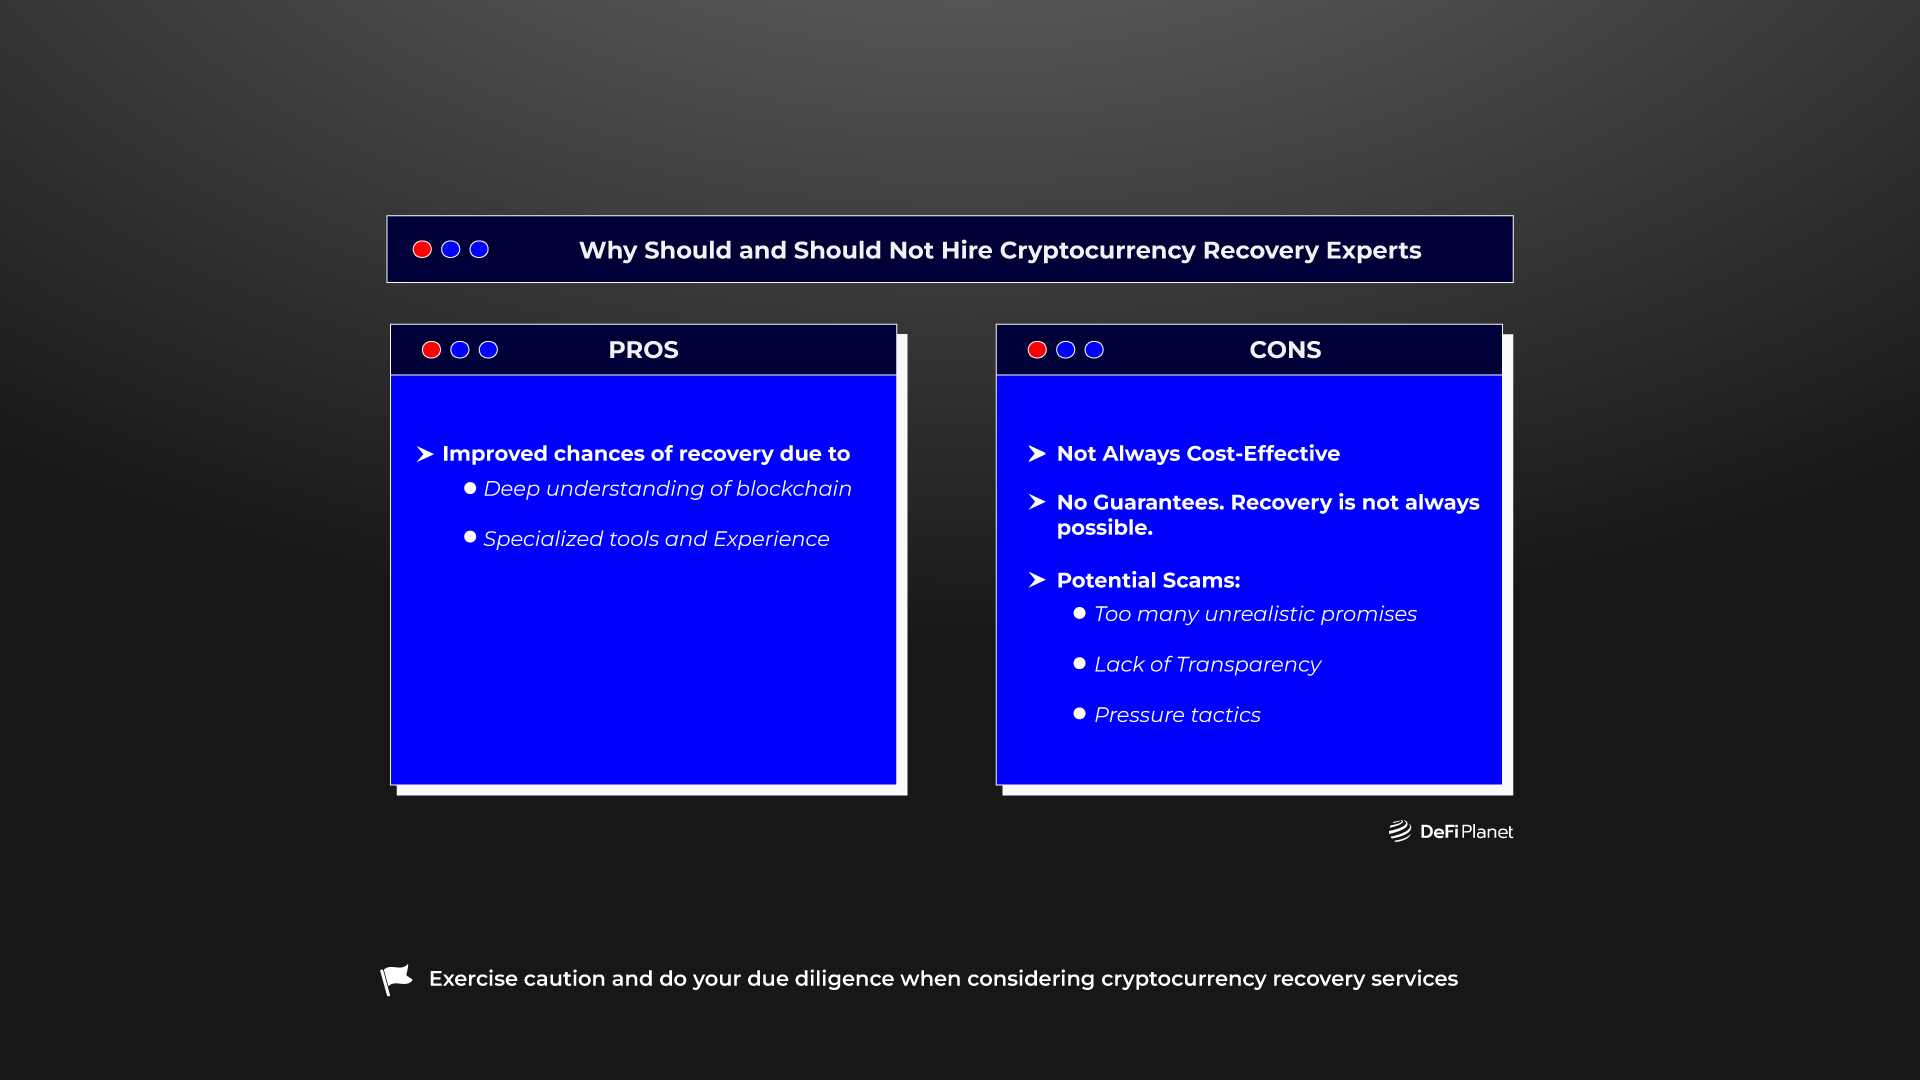 Why Should and Should Not Hire Cryptocurrency Recovery Experts